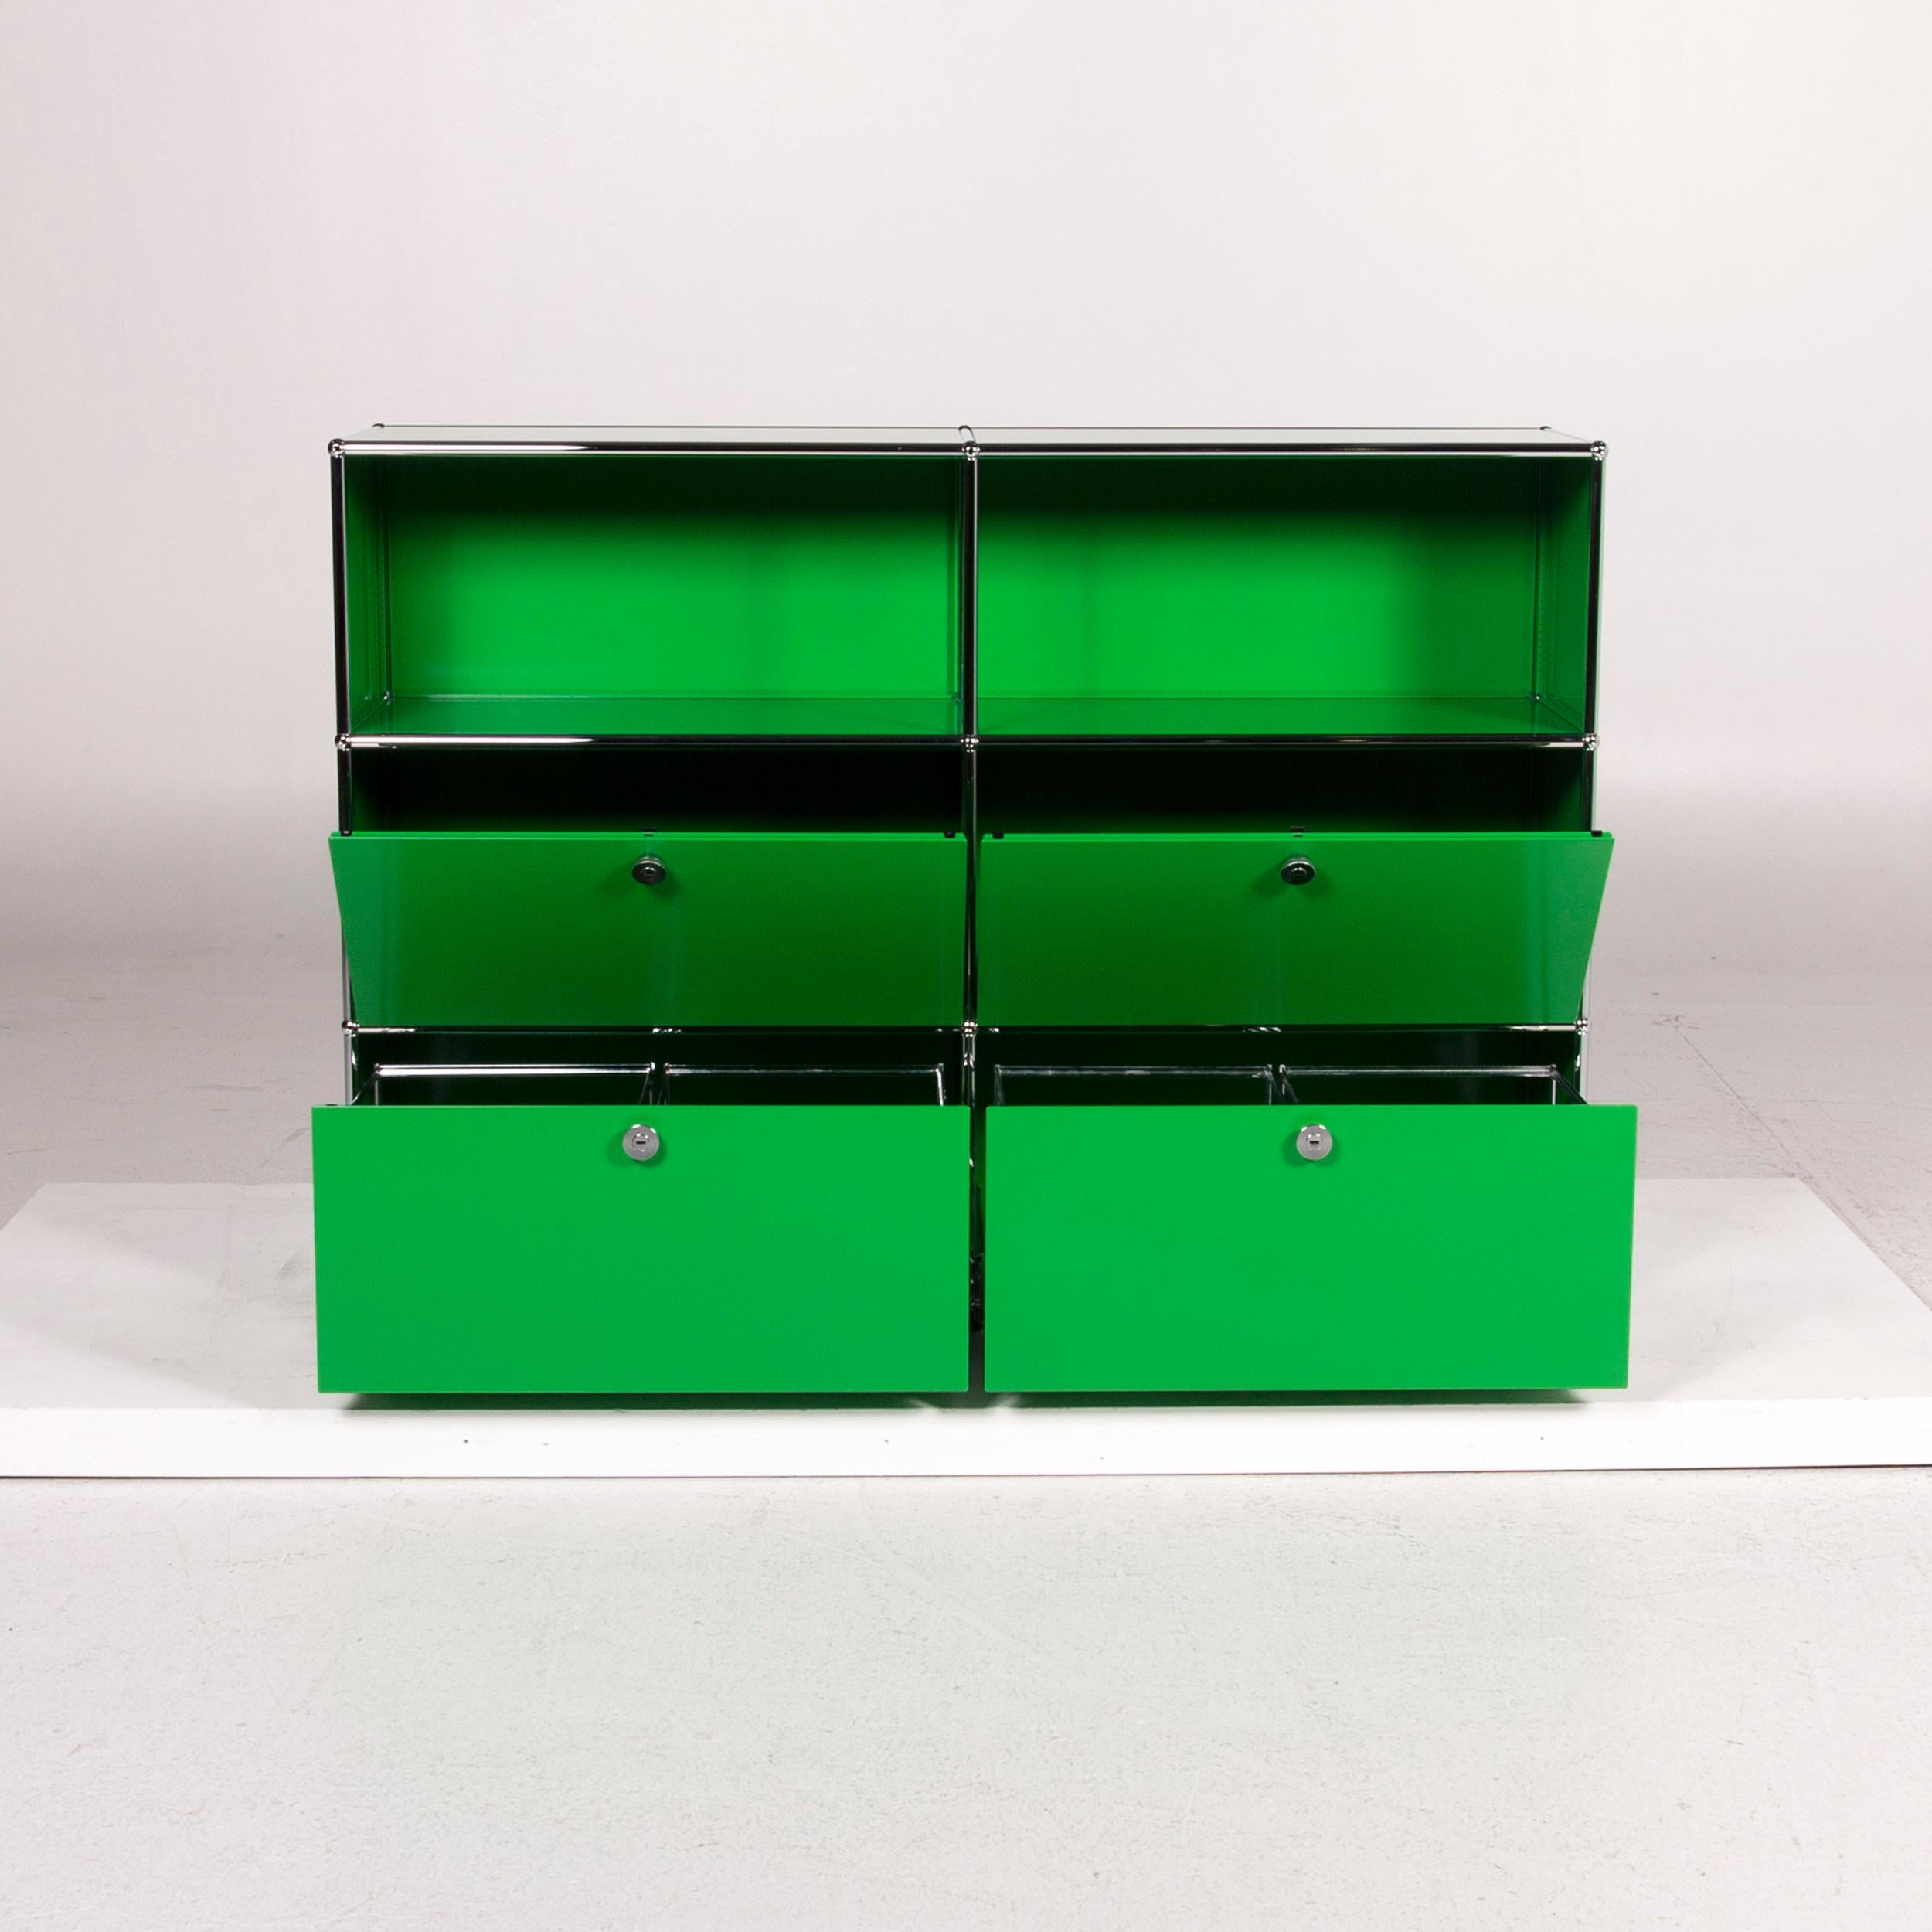 We bring to you an USM Haller Metal Sideboard Green Office Shelf.
 SKU: #11874
 

 Product Measurements in centimeters:
 

 depth: 38
 width: 153
 height: 109
 seat-height: 
 rest-height: 
 seat-depth: 
 seat-width: 
 back-height:
   